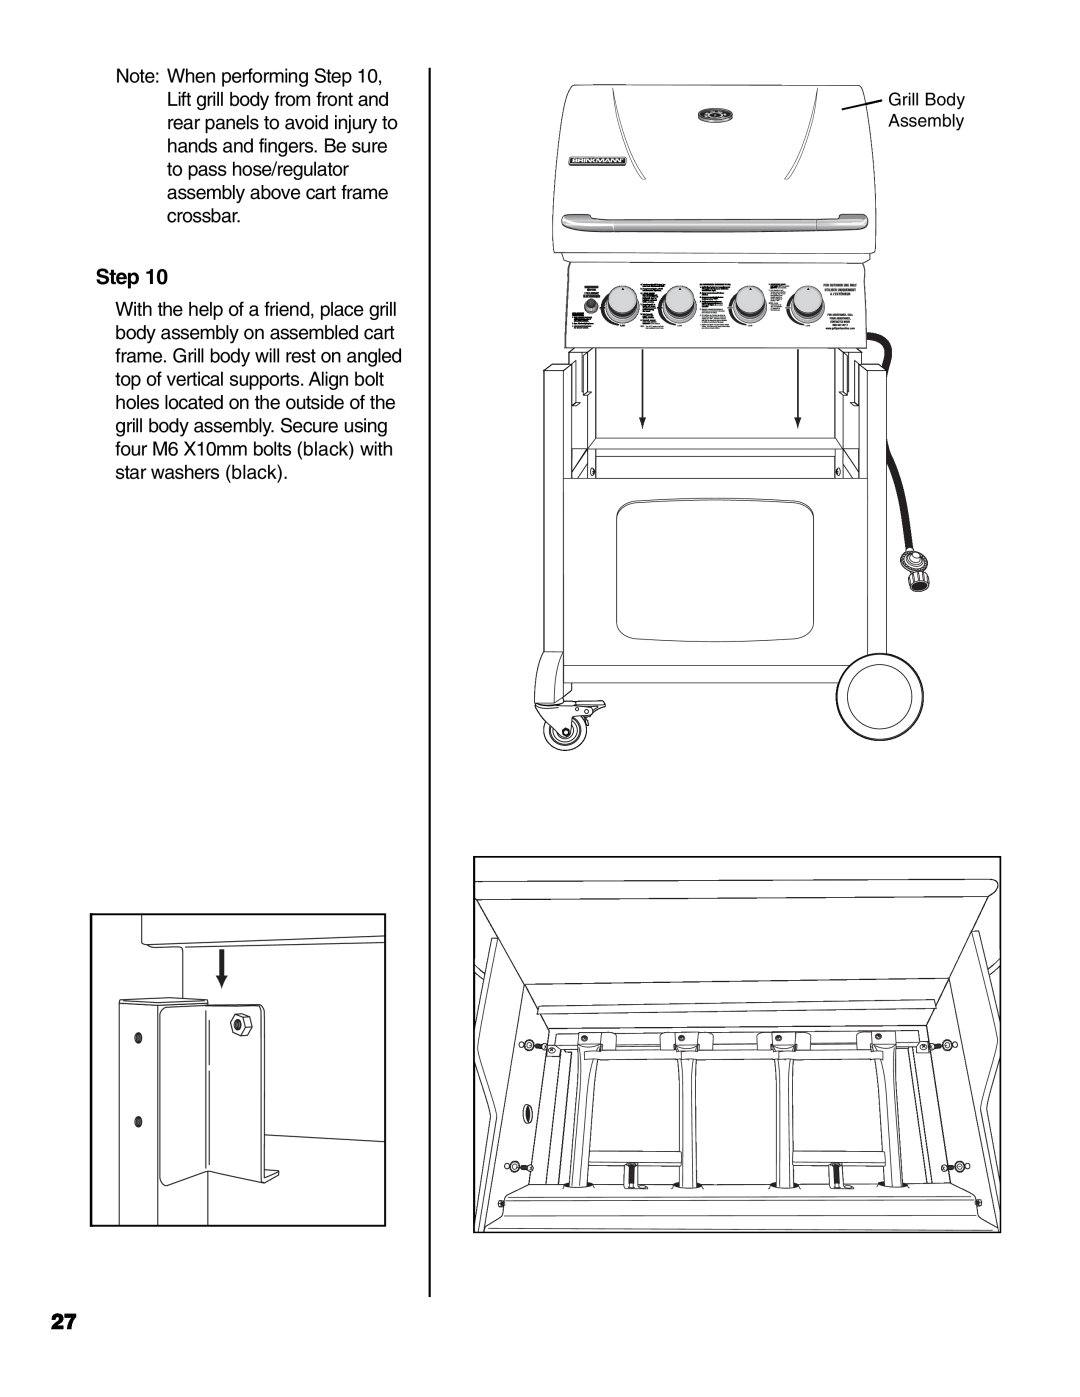 Brinkmann 4 Burner Gas Grill Grill owner manual Step, Grill Body Assembly 